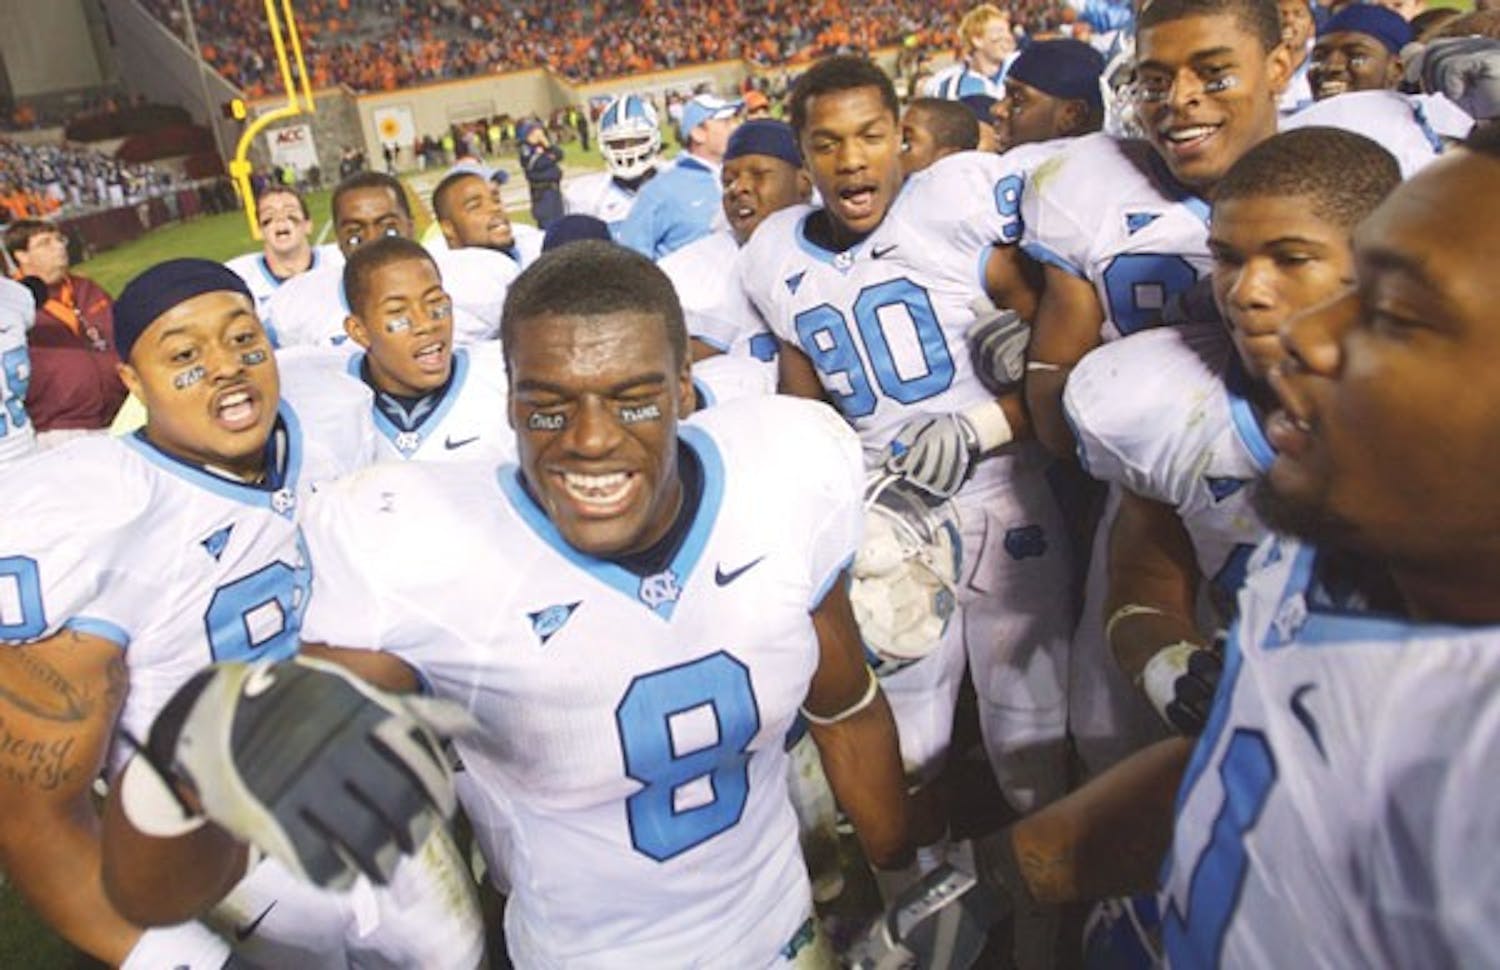 Greg Little (8) and members of North Carolina’s football team celebrate after UNC upset No. 14 Virginia Tech. DTH/Andrew Dye